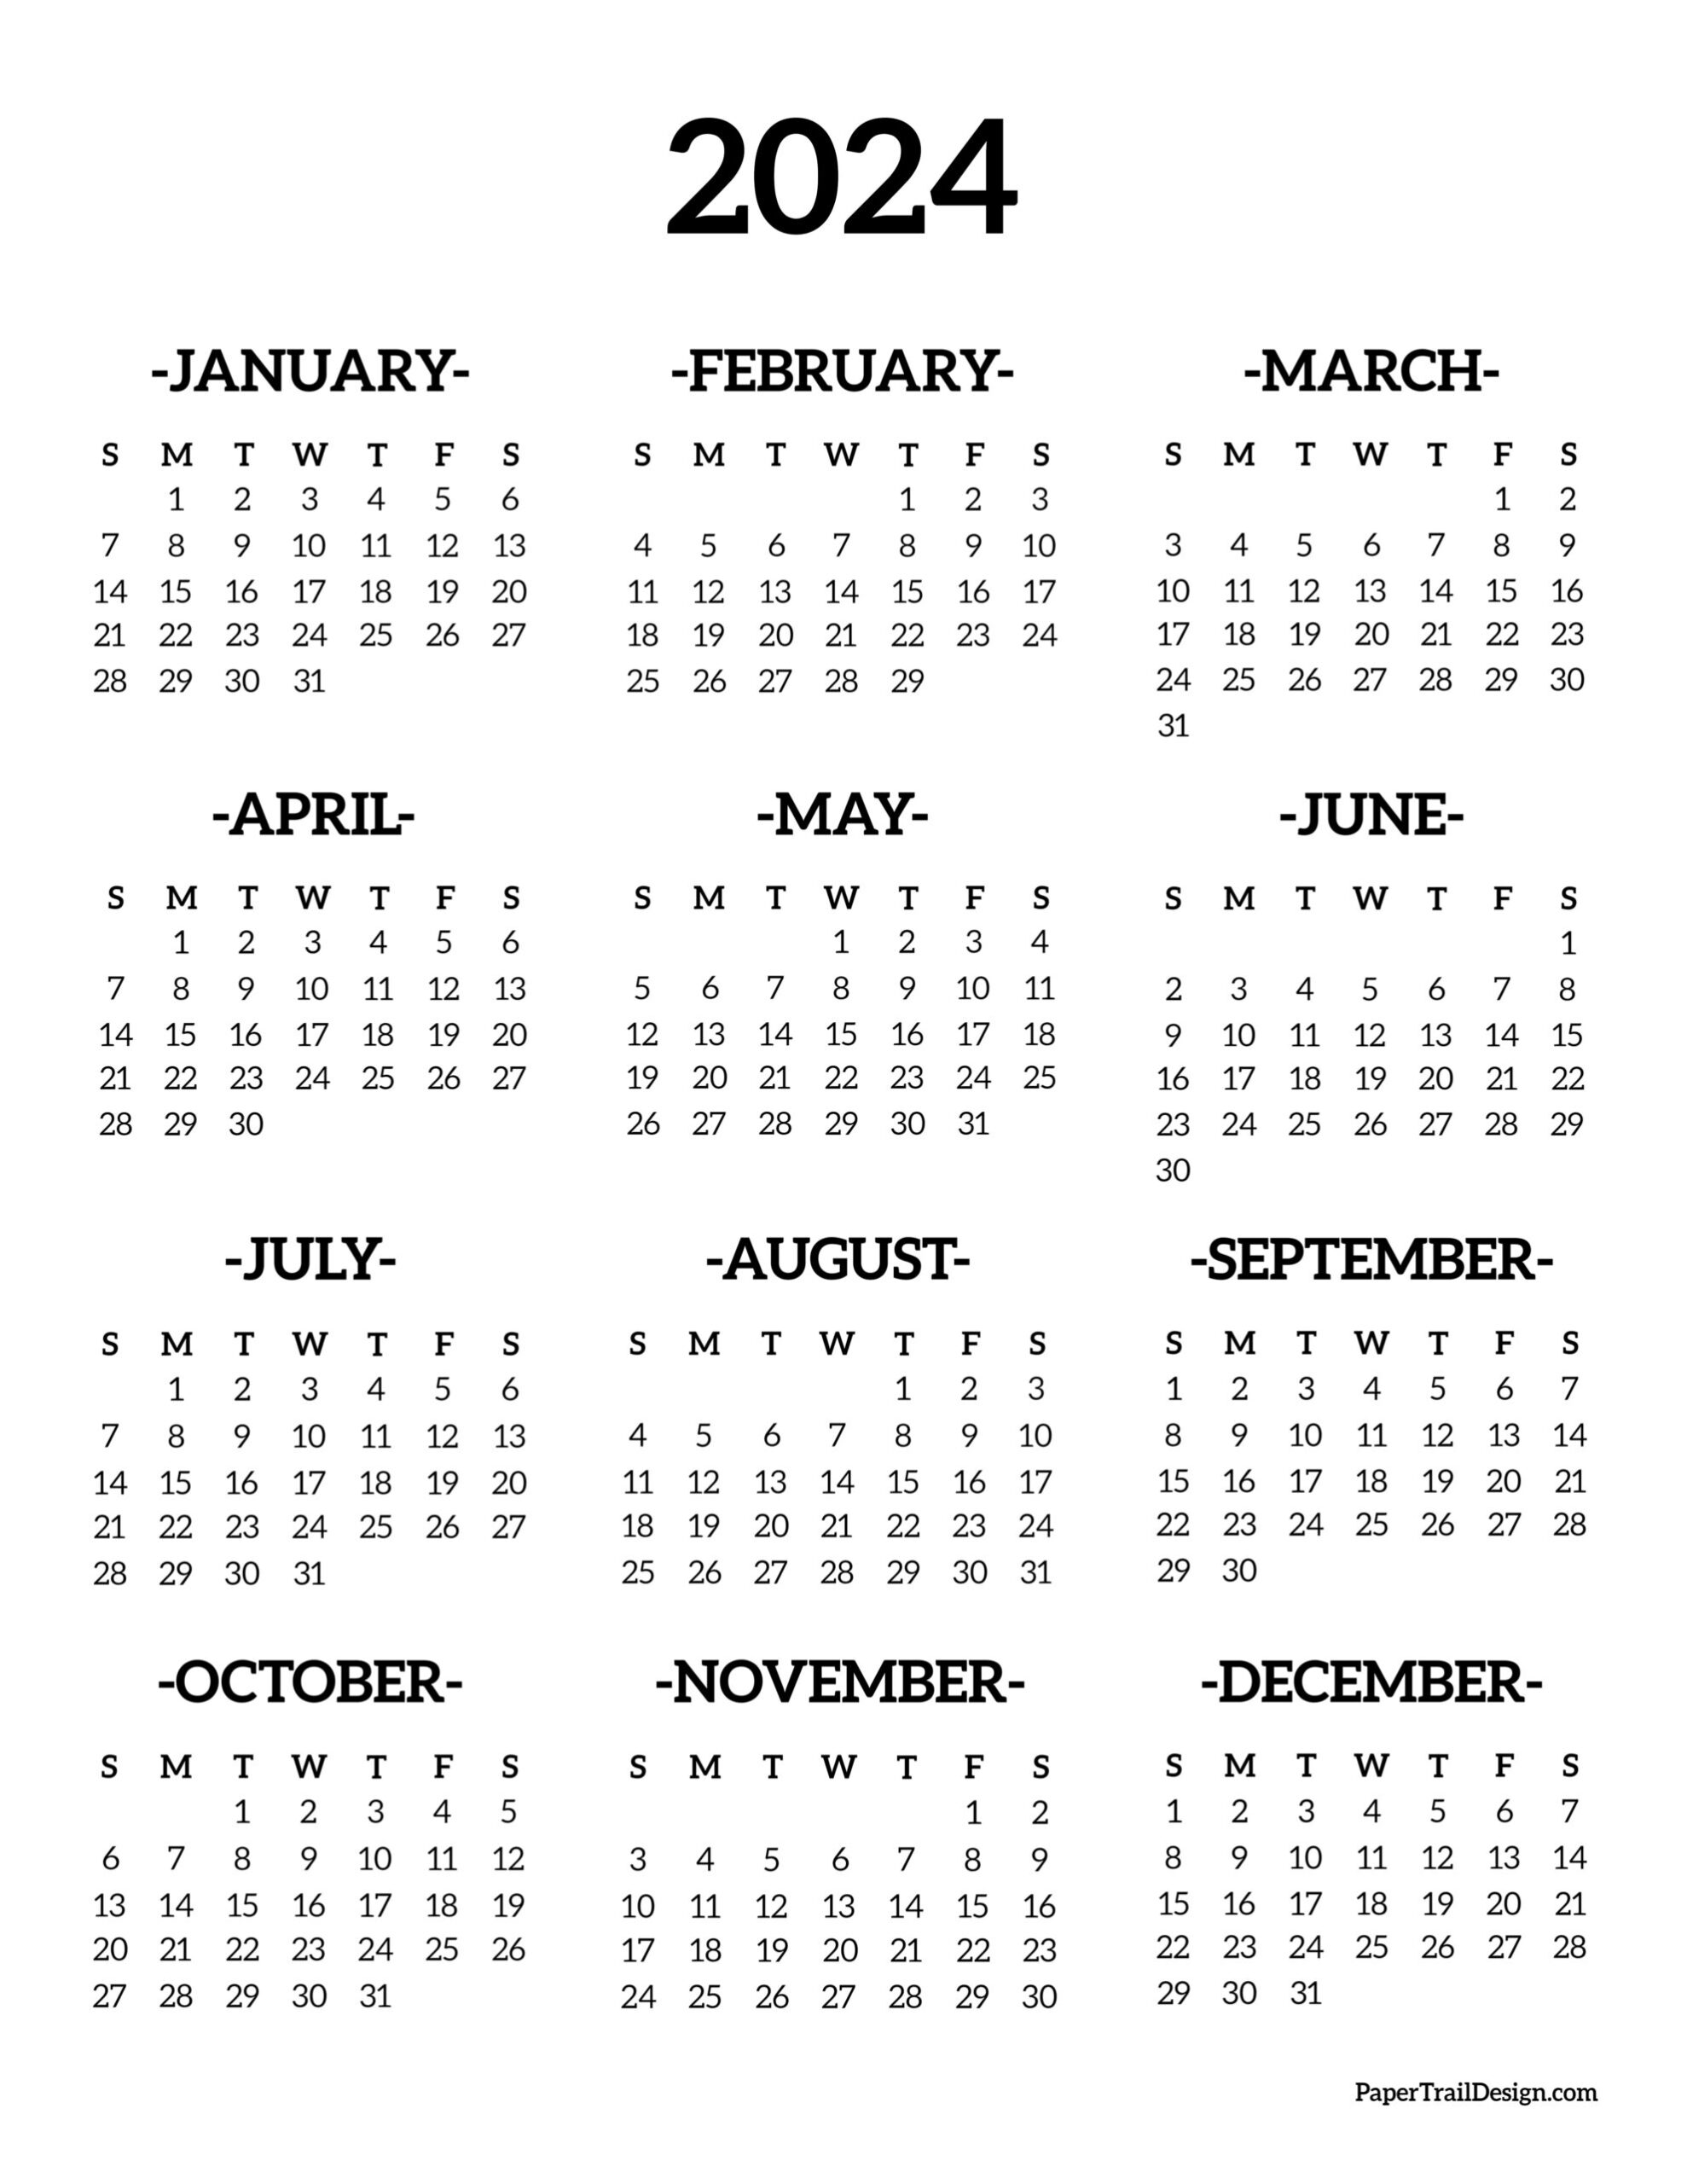 Calendar 2024 Printable One Page - Paper Trail Design for Calendar Printable Year 2024